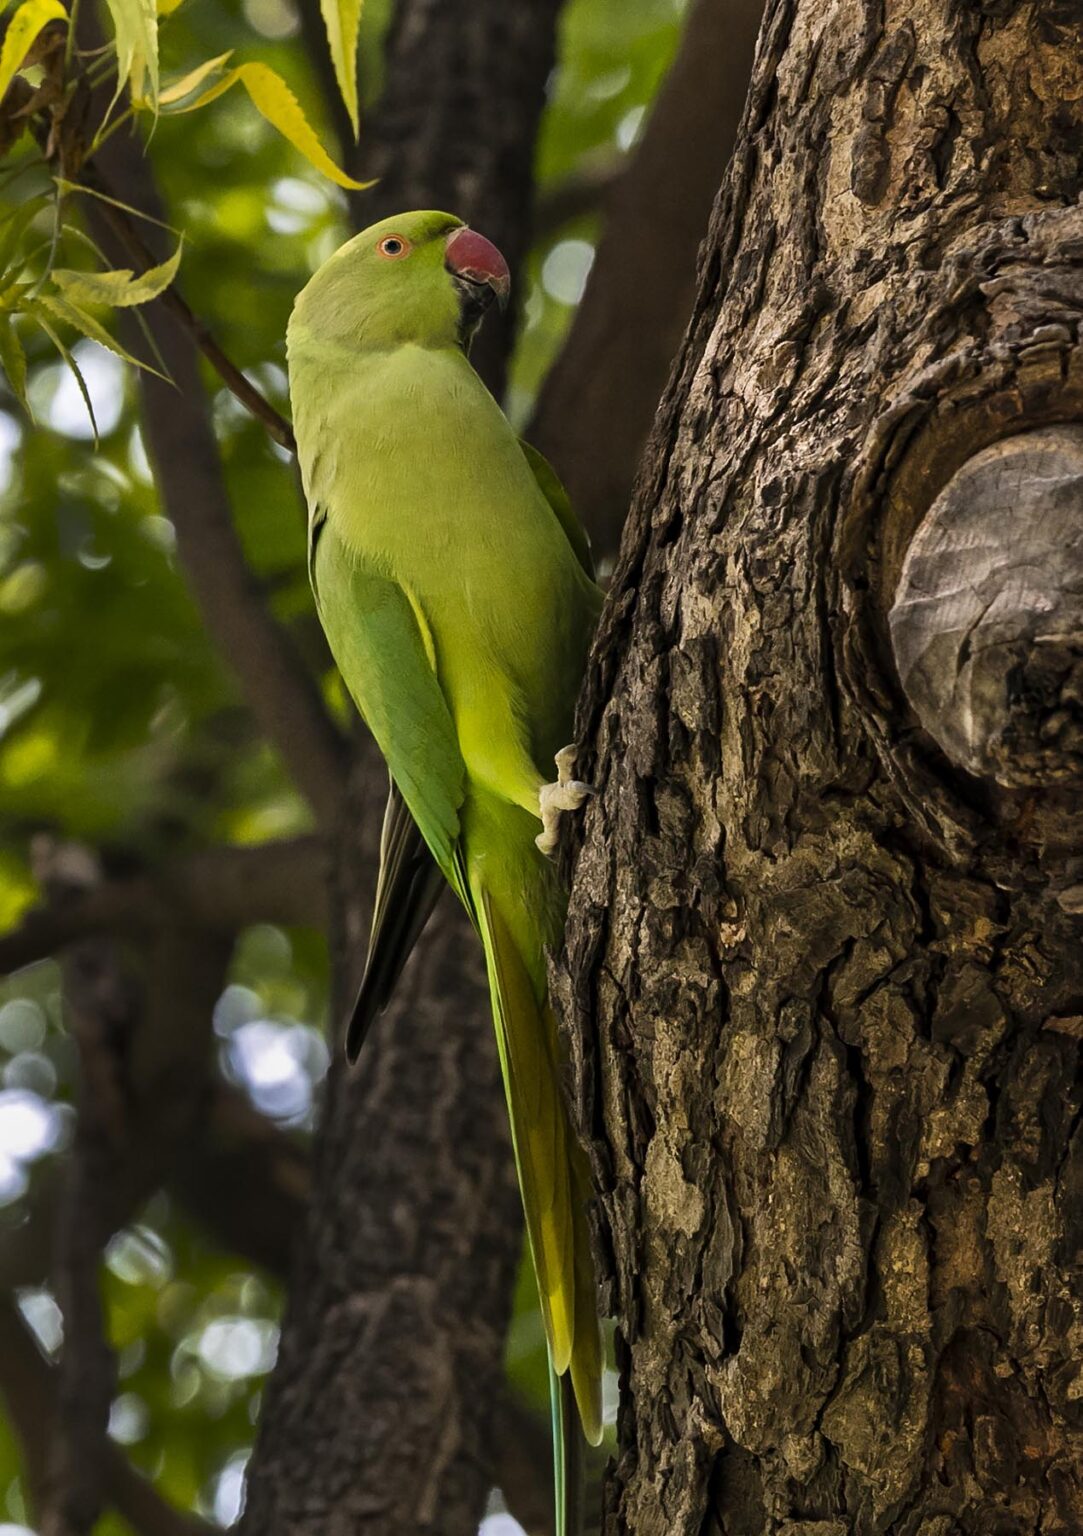 An INDIAN RINGNECK PARROT roosts in a tree at the QUTB COMPLEX - NEW DELHI, INDIA